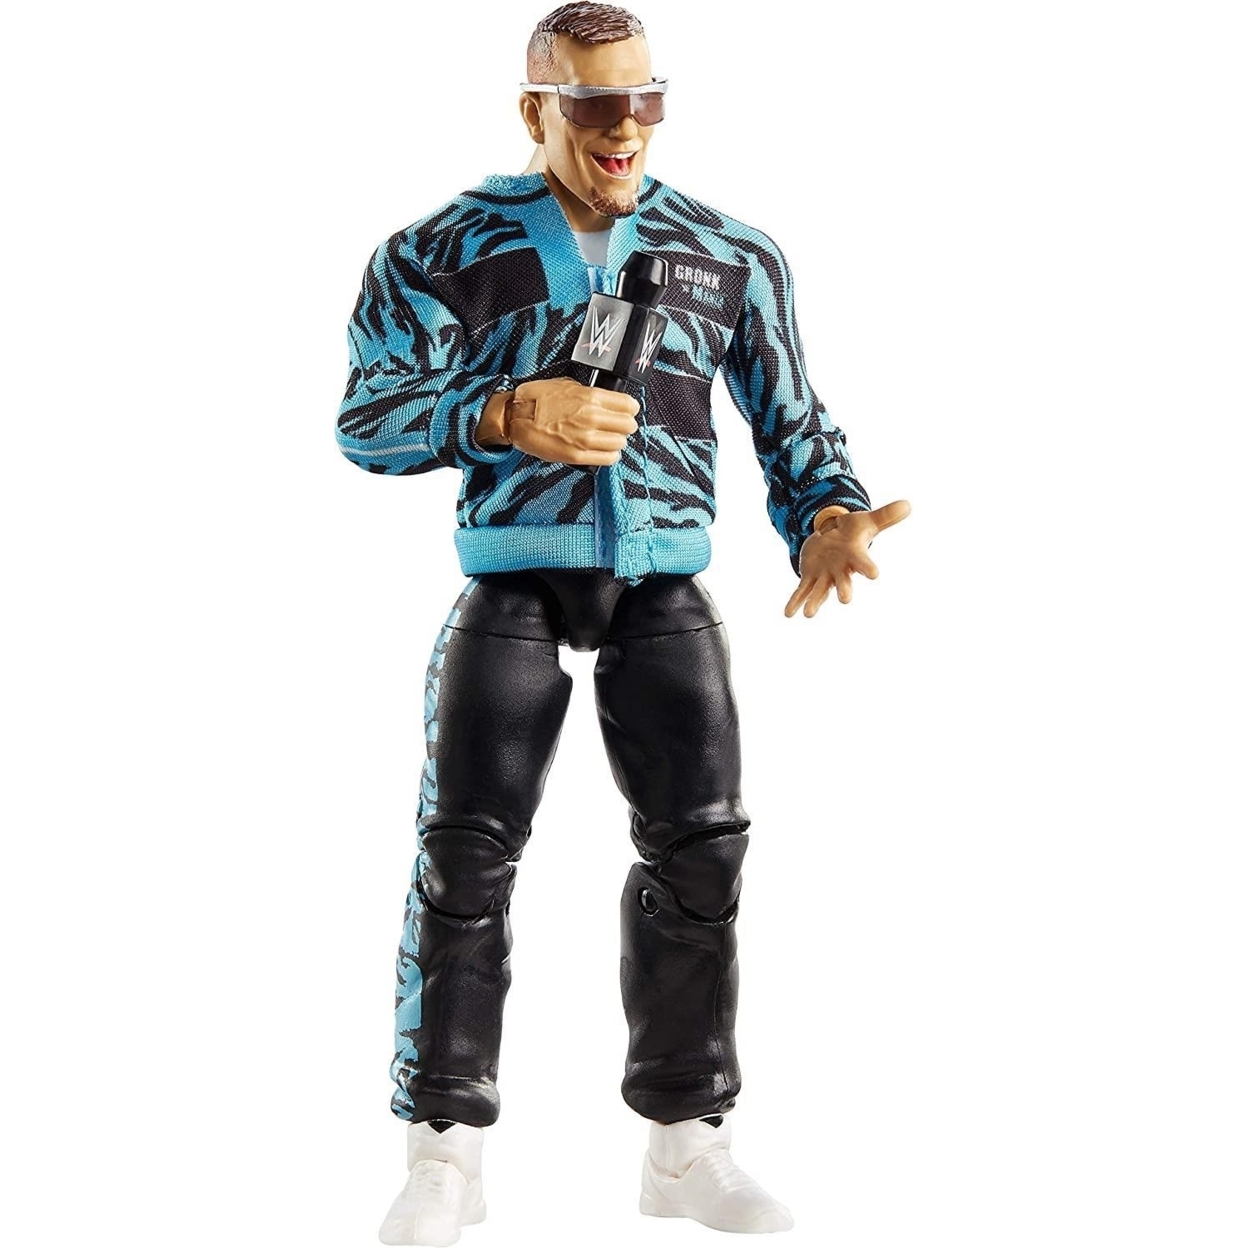 WWE Rob Gronkowski Elite Collection Action Figure with Accessories - image 3 of 7